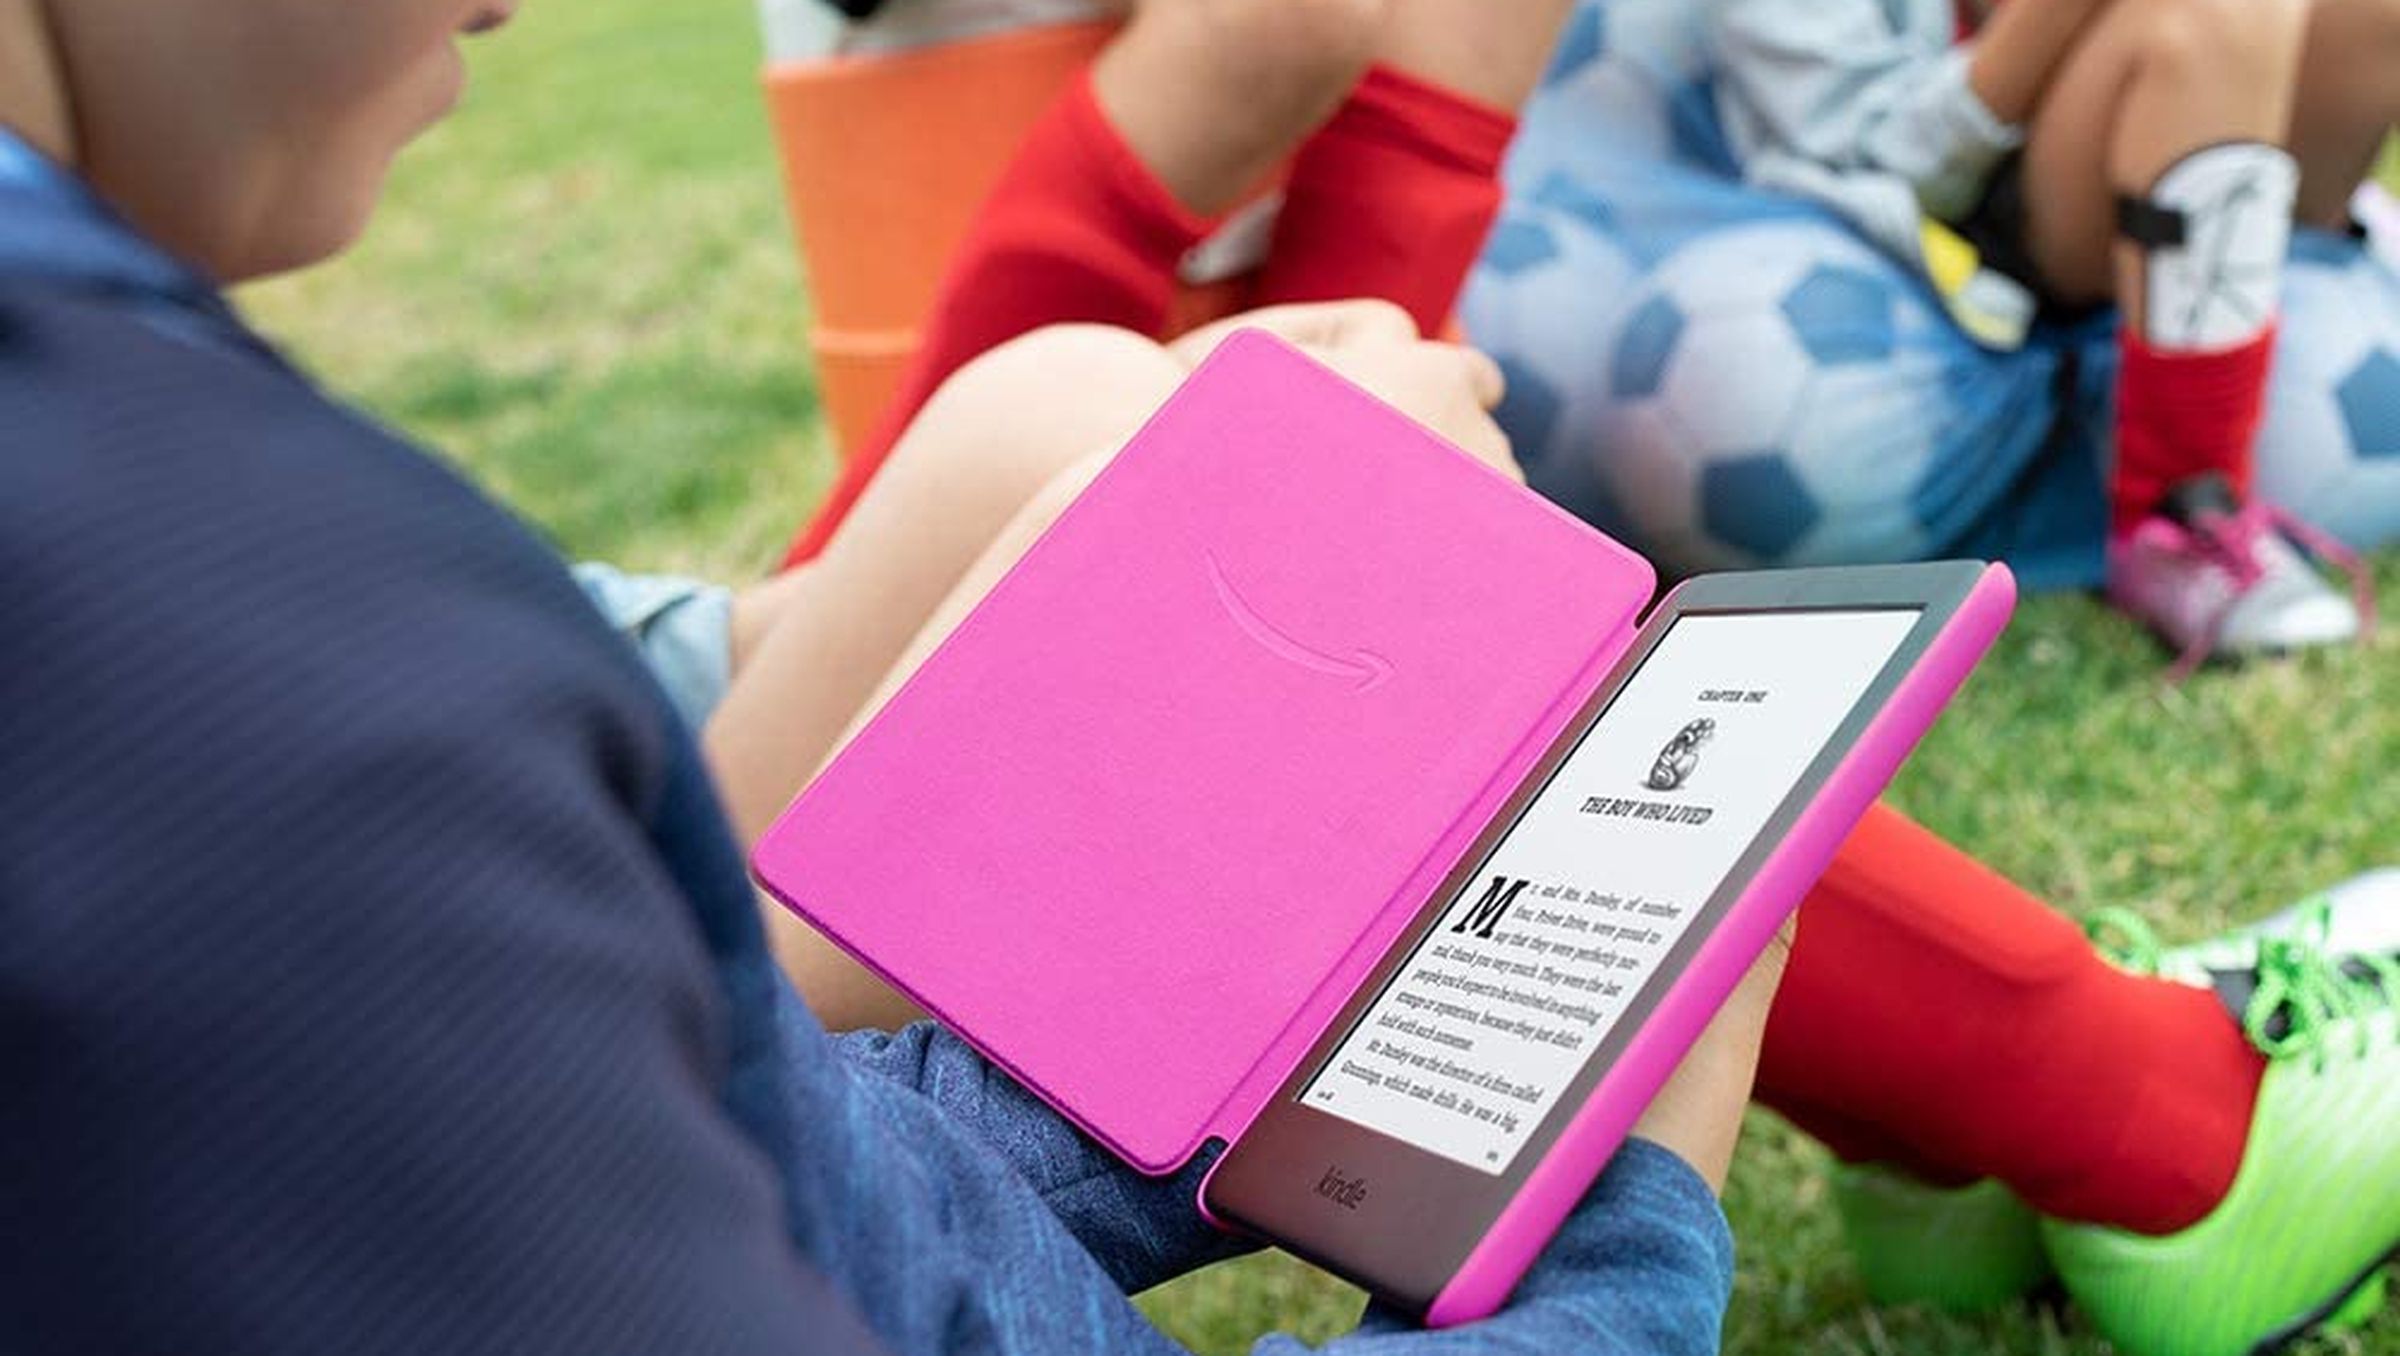 A child holding and reading a pink Kindle while sitting on grass.